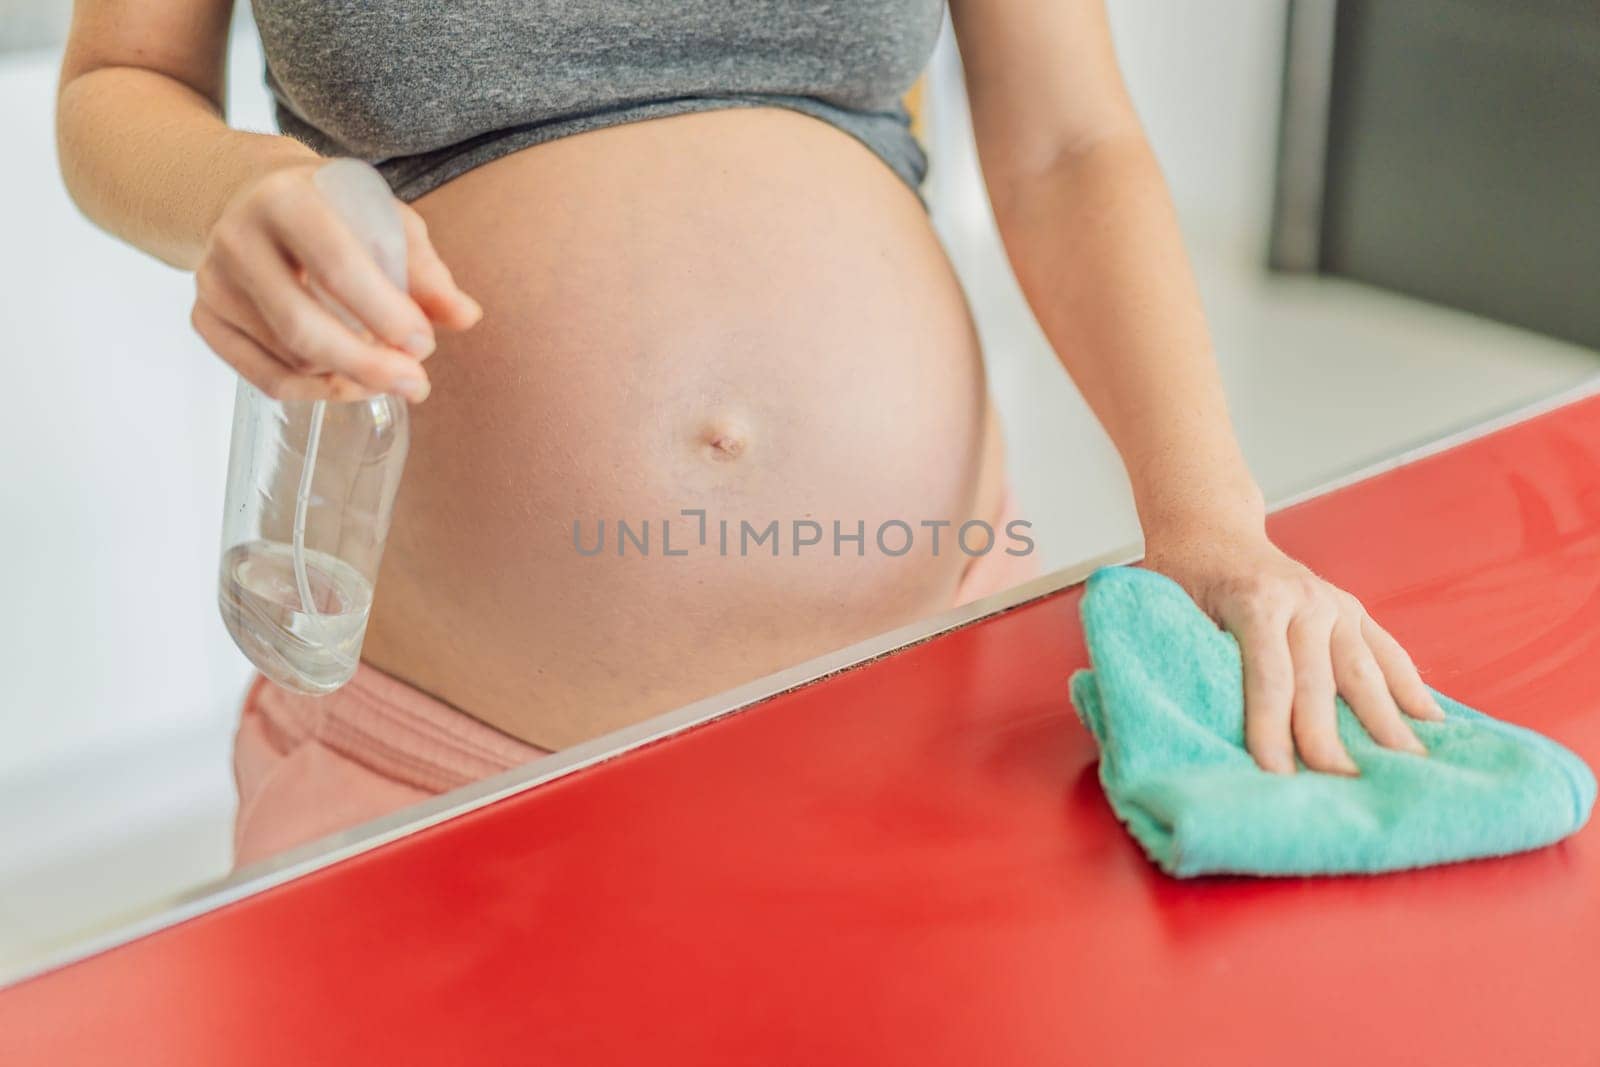 Efficient and dedicated, a pregnant woman tackles kitchen chores, ensuring a clean and organized space, exemplifying resilience and care during her pregnancy by galitskaya